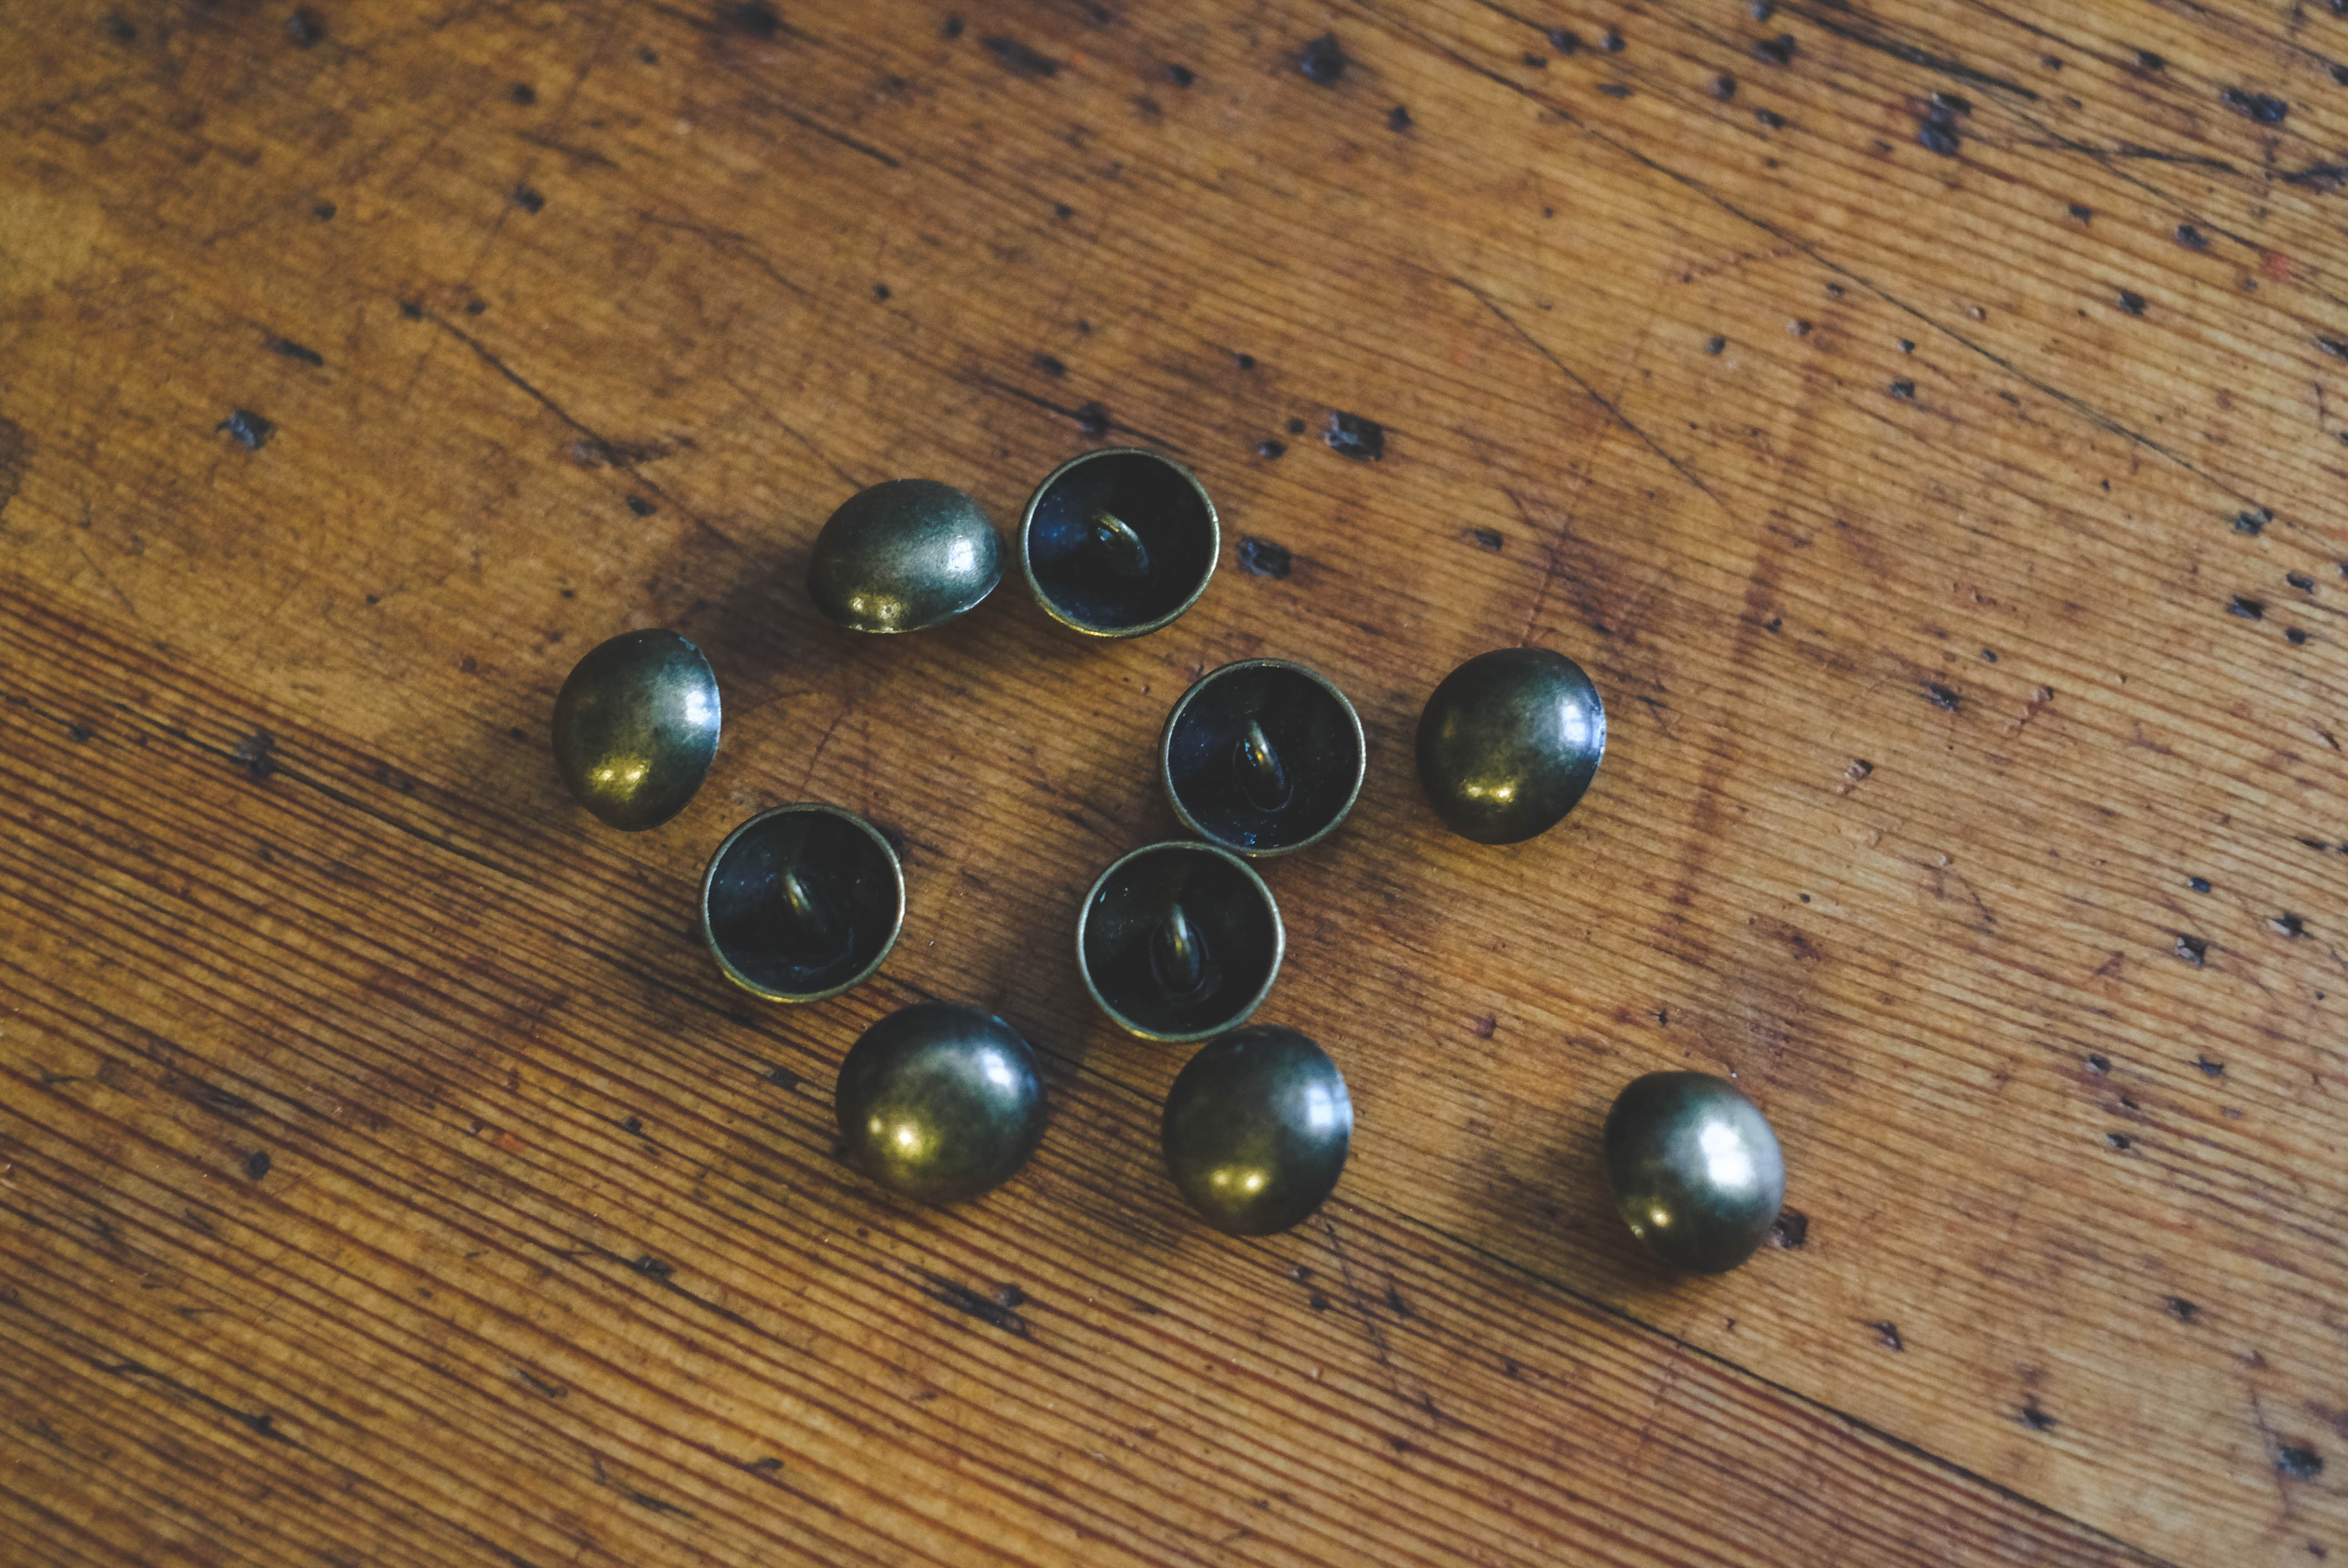 Metal dome button- antique brons 12mm